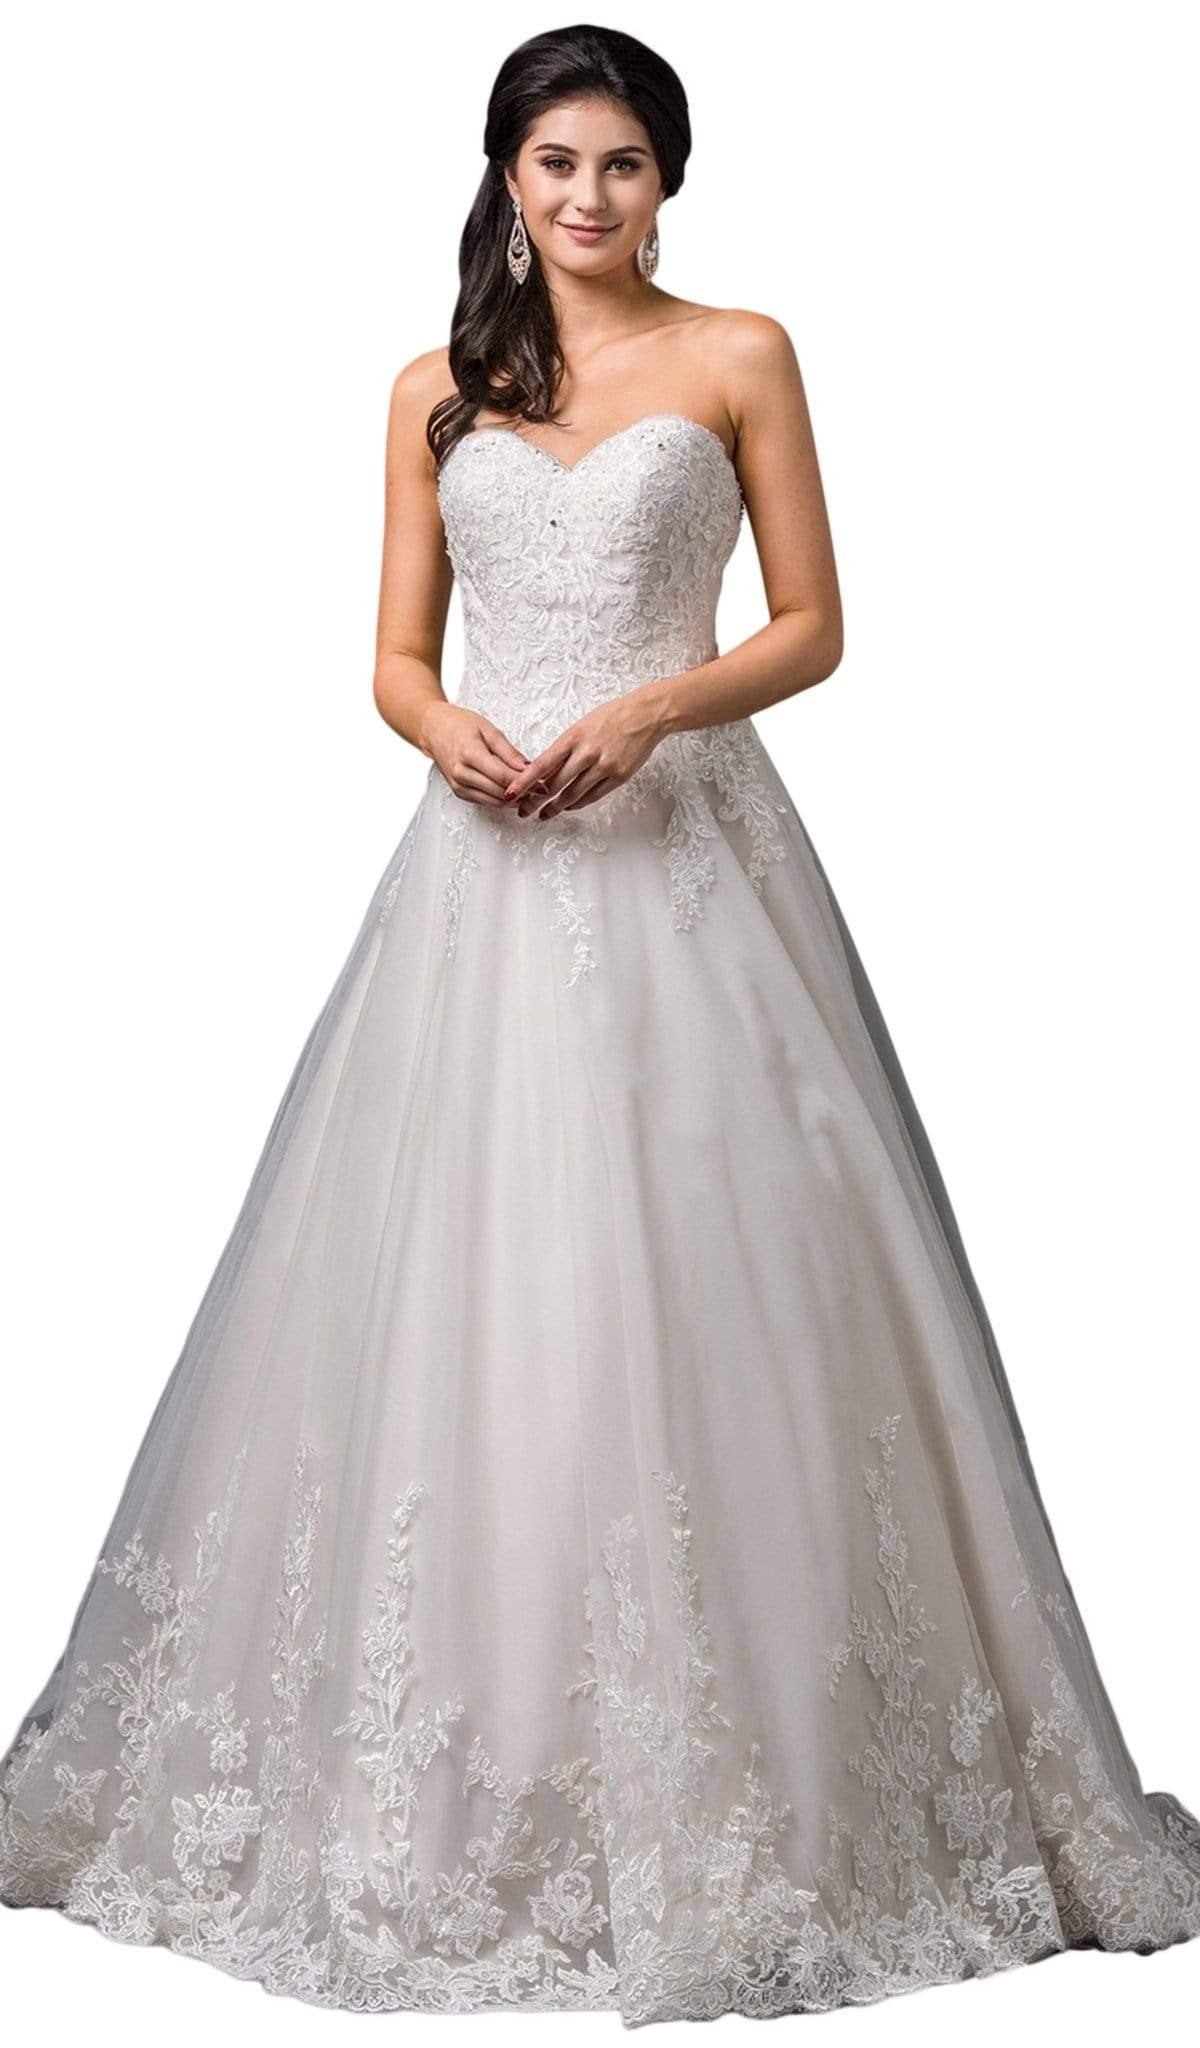 Image of Dancing Queen Bridal - 85 Strapless Embroidered Sweetheart Ballgown